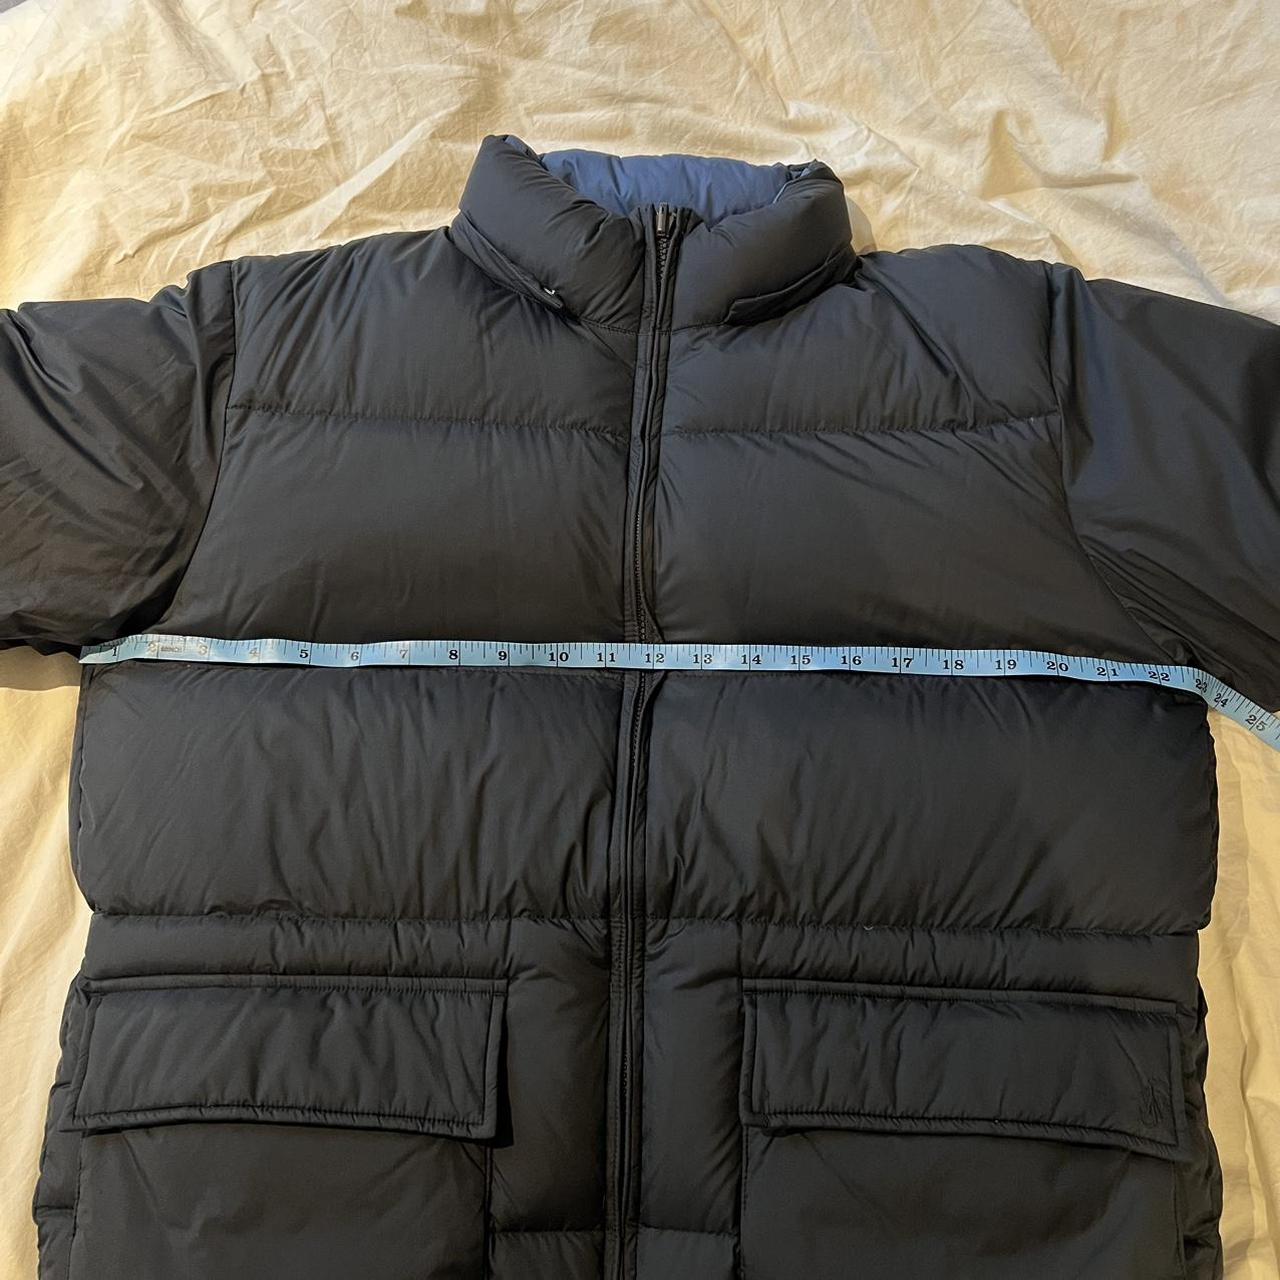 additional measurements pics for jw anderson puffer... - Depop